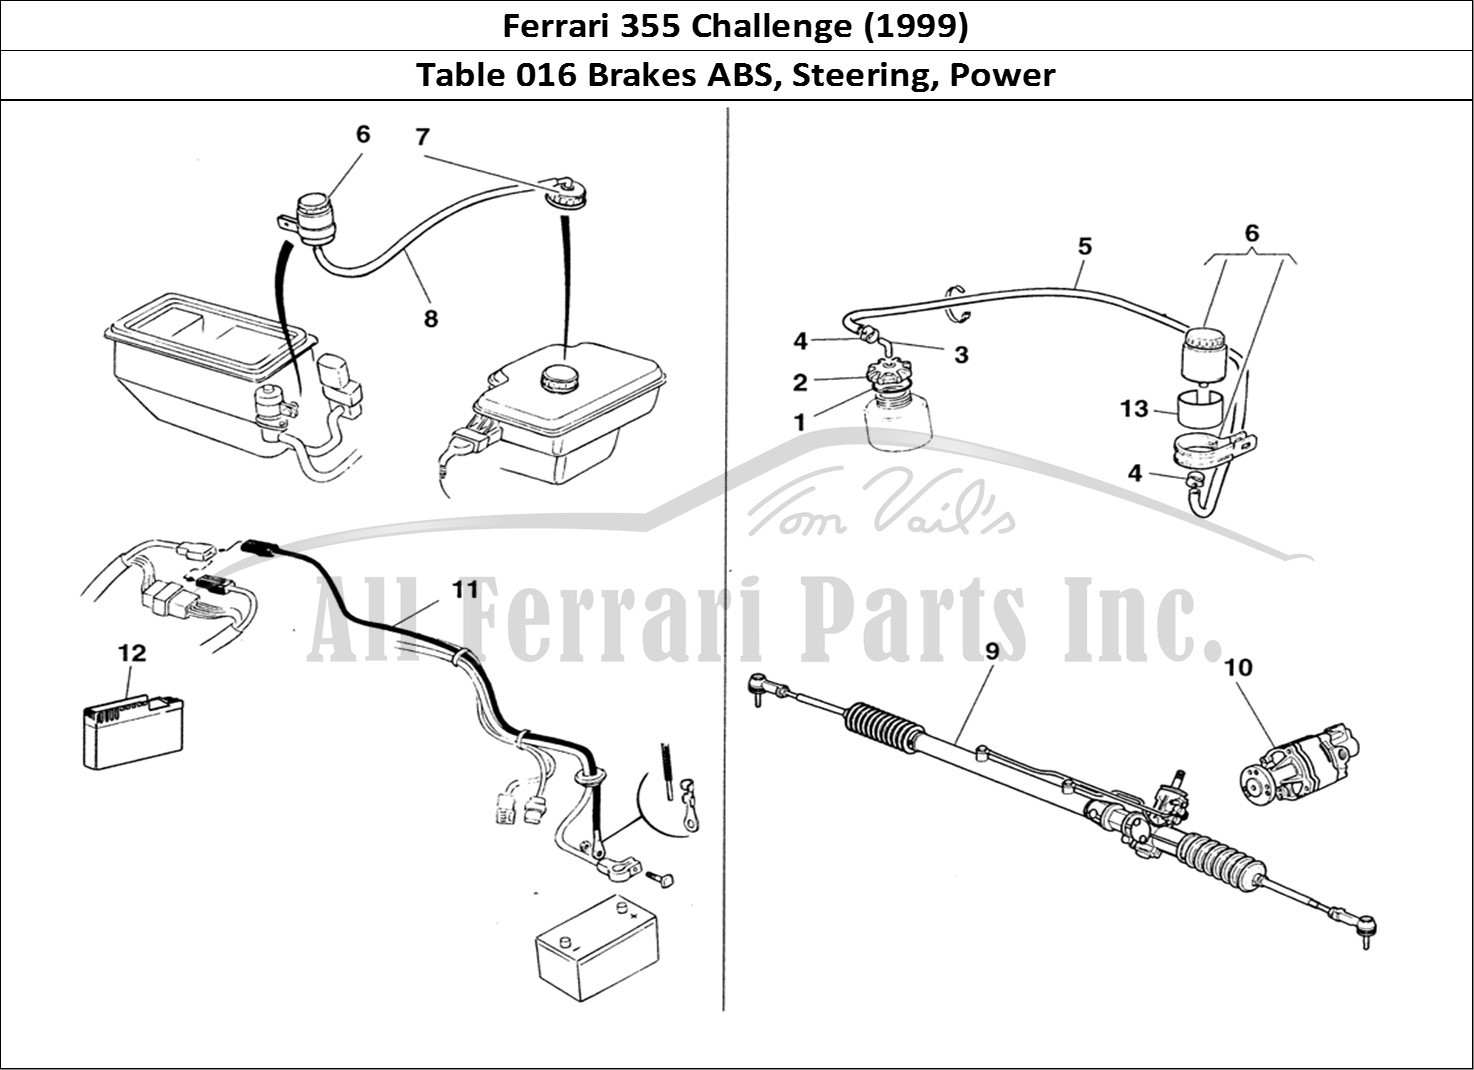 Ferrari Parts Ferrari 355 Challenge (1999) Page 016 ABS and Power-Steering